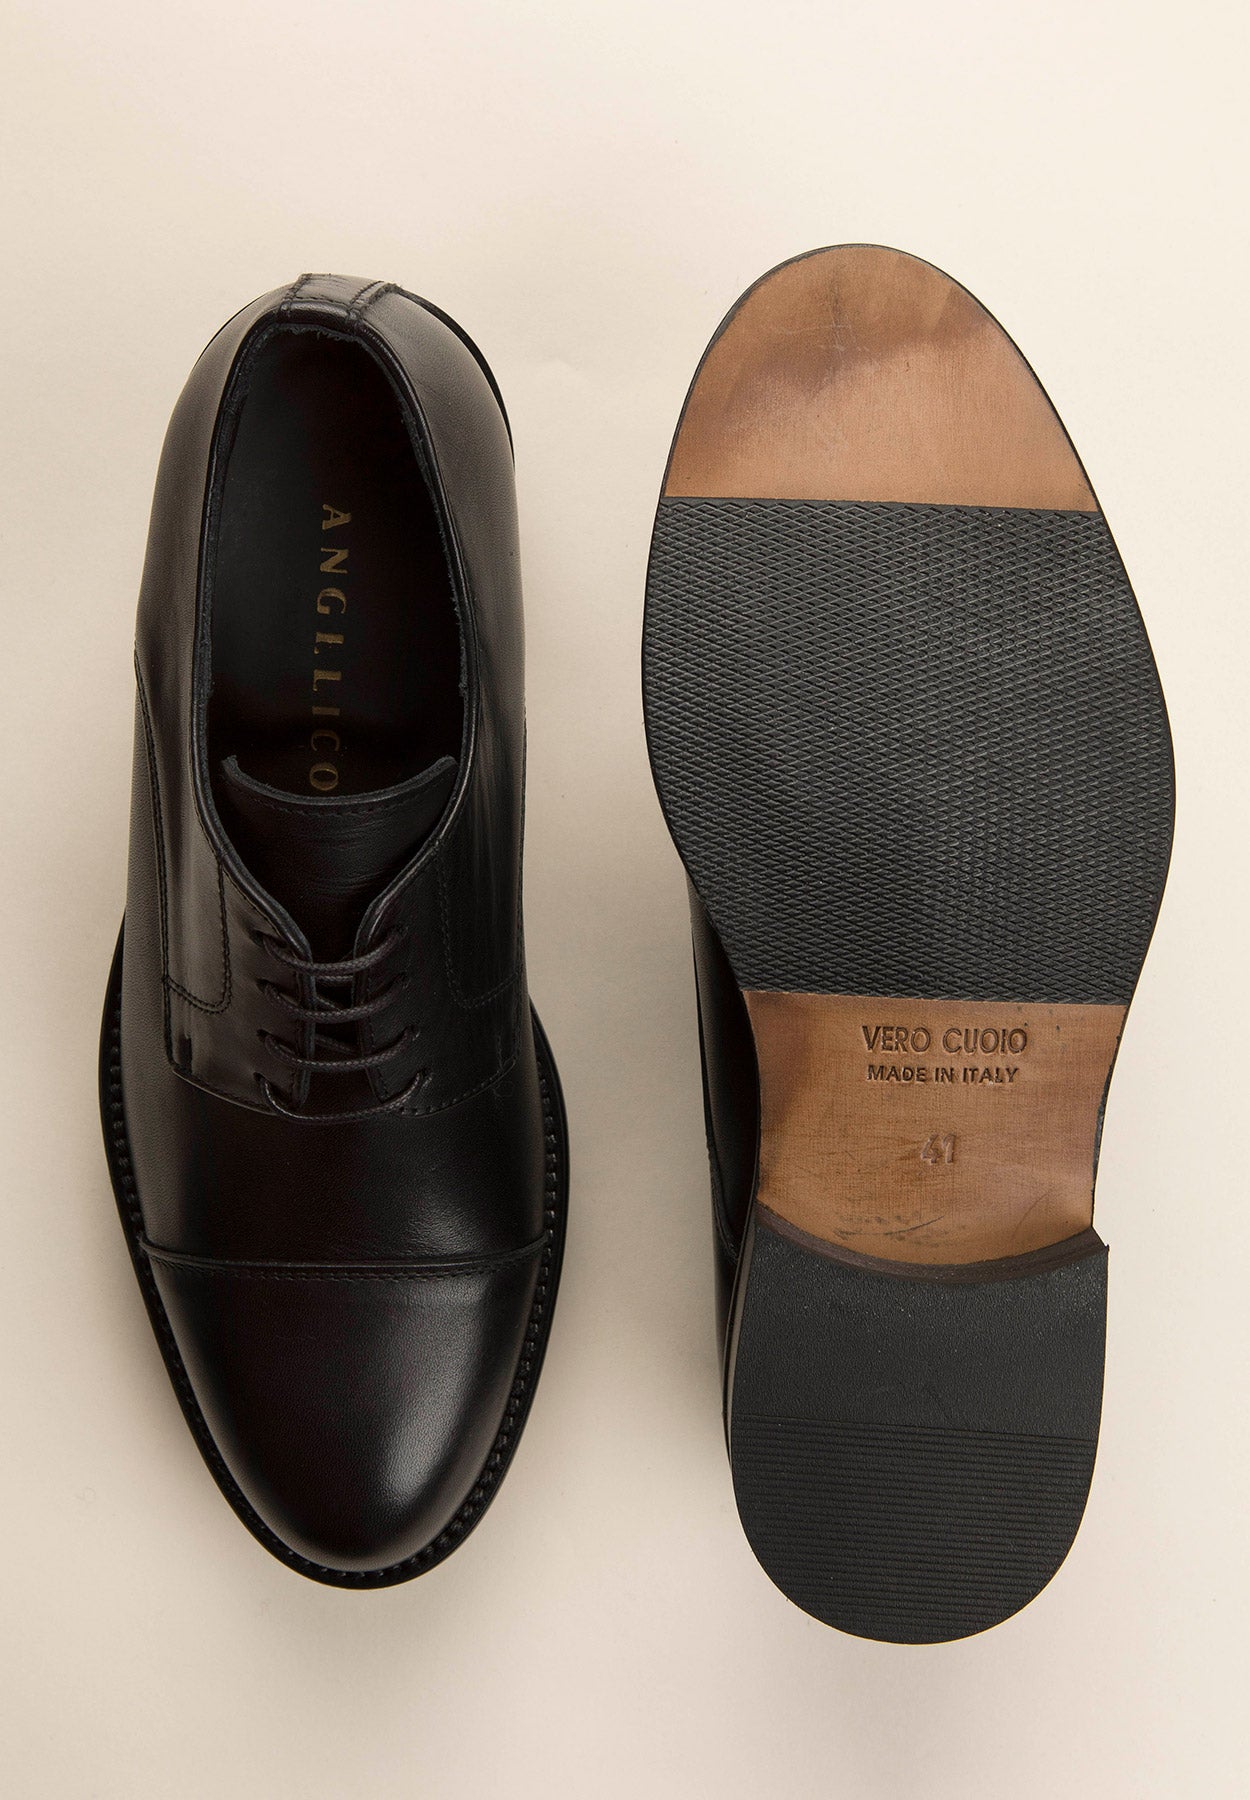 Black leather derby shoe with stitched toe cap